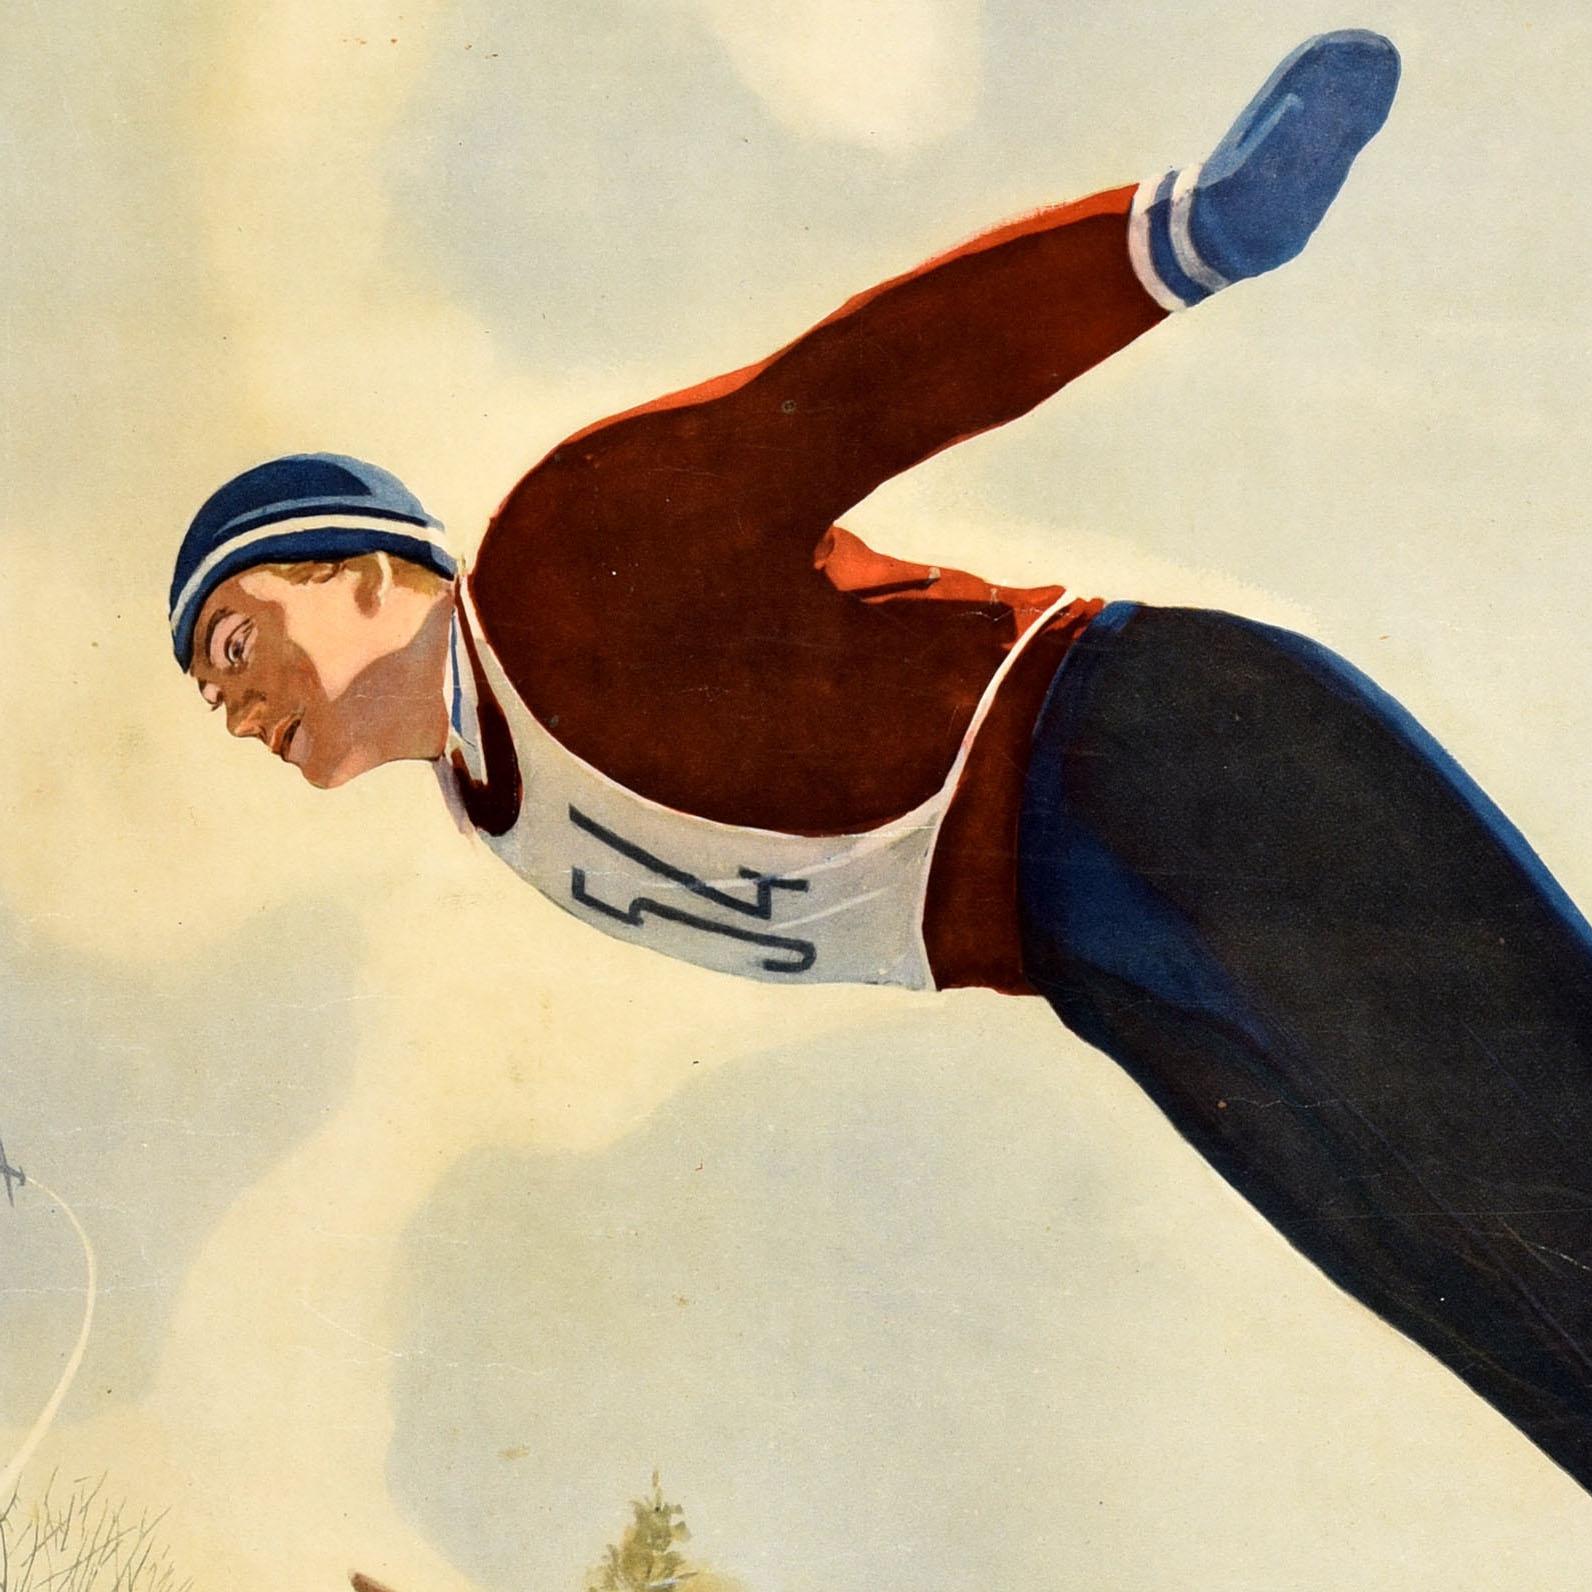 Original vintage Soviet sport poster - Strive to Achieve High Skiing Skills / ???????? ?? ??????? ?????????? ? ?????? ??????! Dynamic illustration of a skier wearing a number 54 bib leaning forward on wooden skis in a ski jump with a red flag and